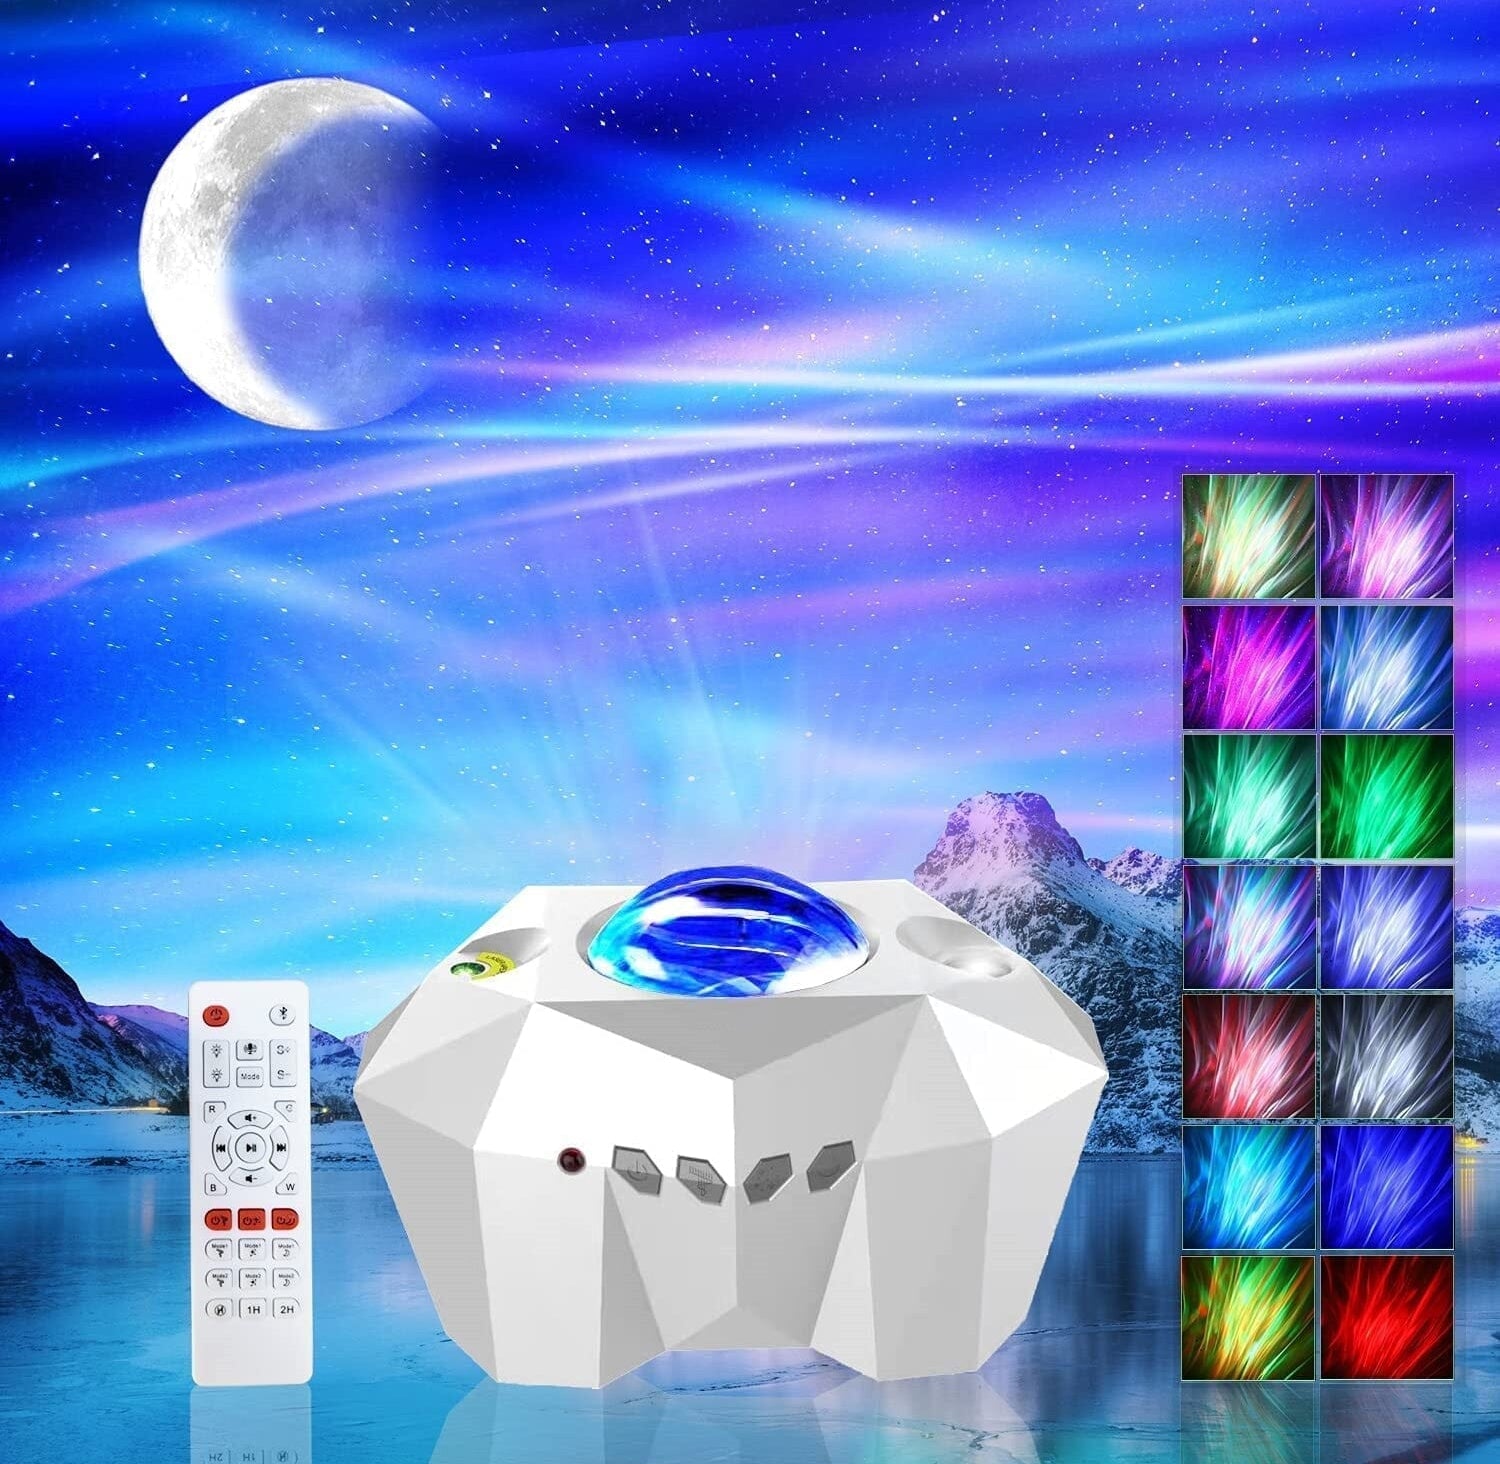 LED Aurora Projector Galaxy Starry Sky Projector Lamp Northern Lights Bedroom Home Room Decoration Nightlights Luminaires Gift 0 The Autistic Innovator Projector White China 